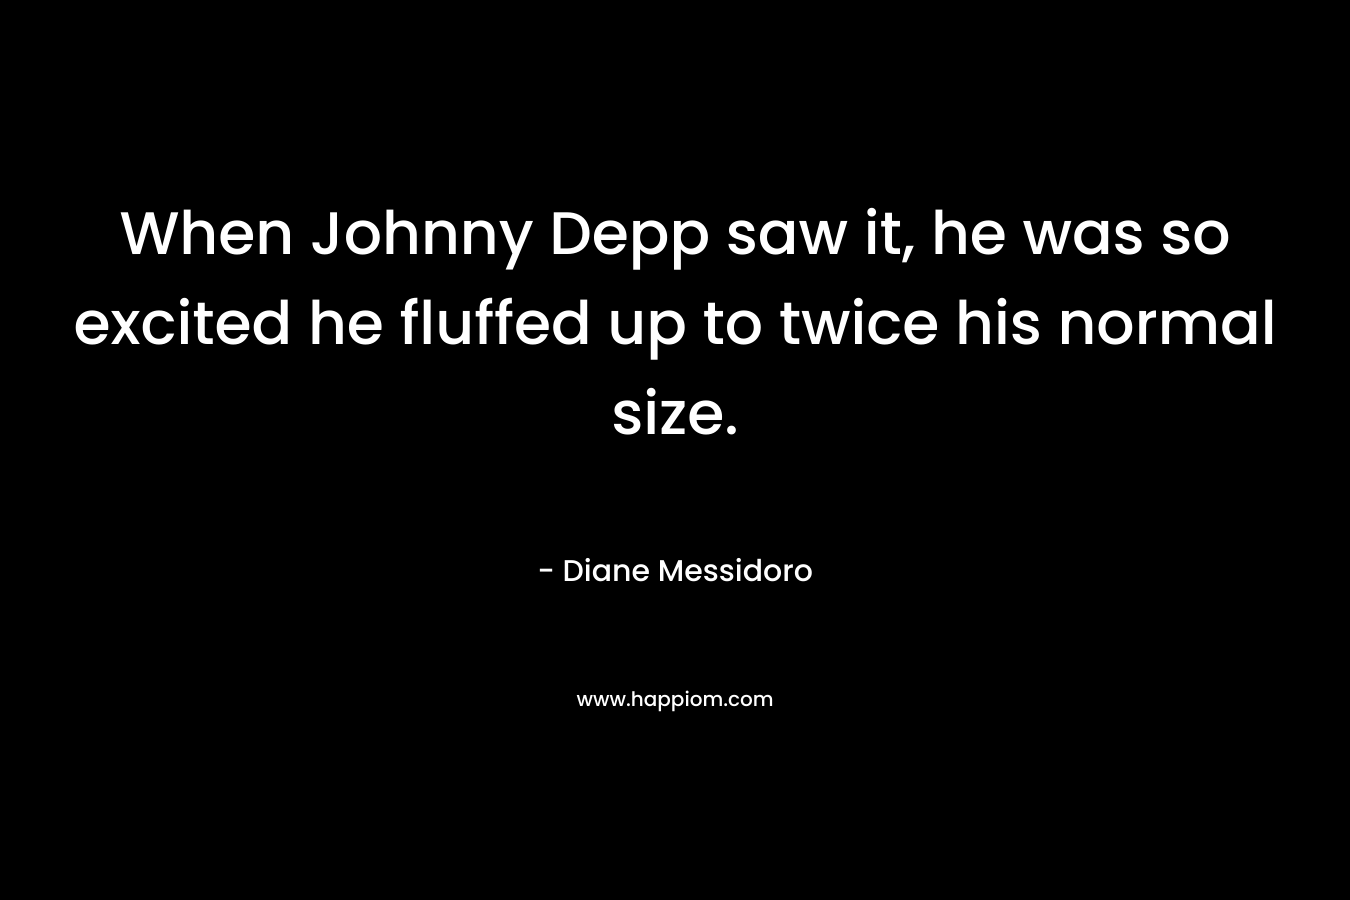 When Johnny Depp saw it, he was so excited he fluffed up to twice his normal size. – Diane Messidoro